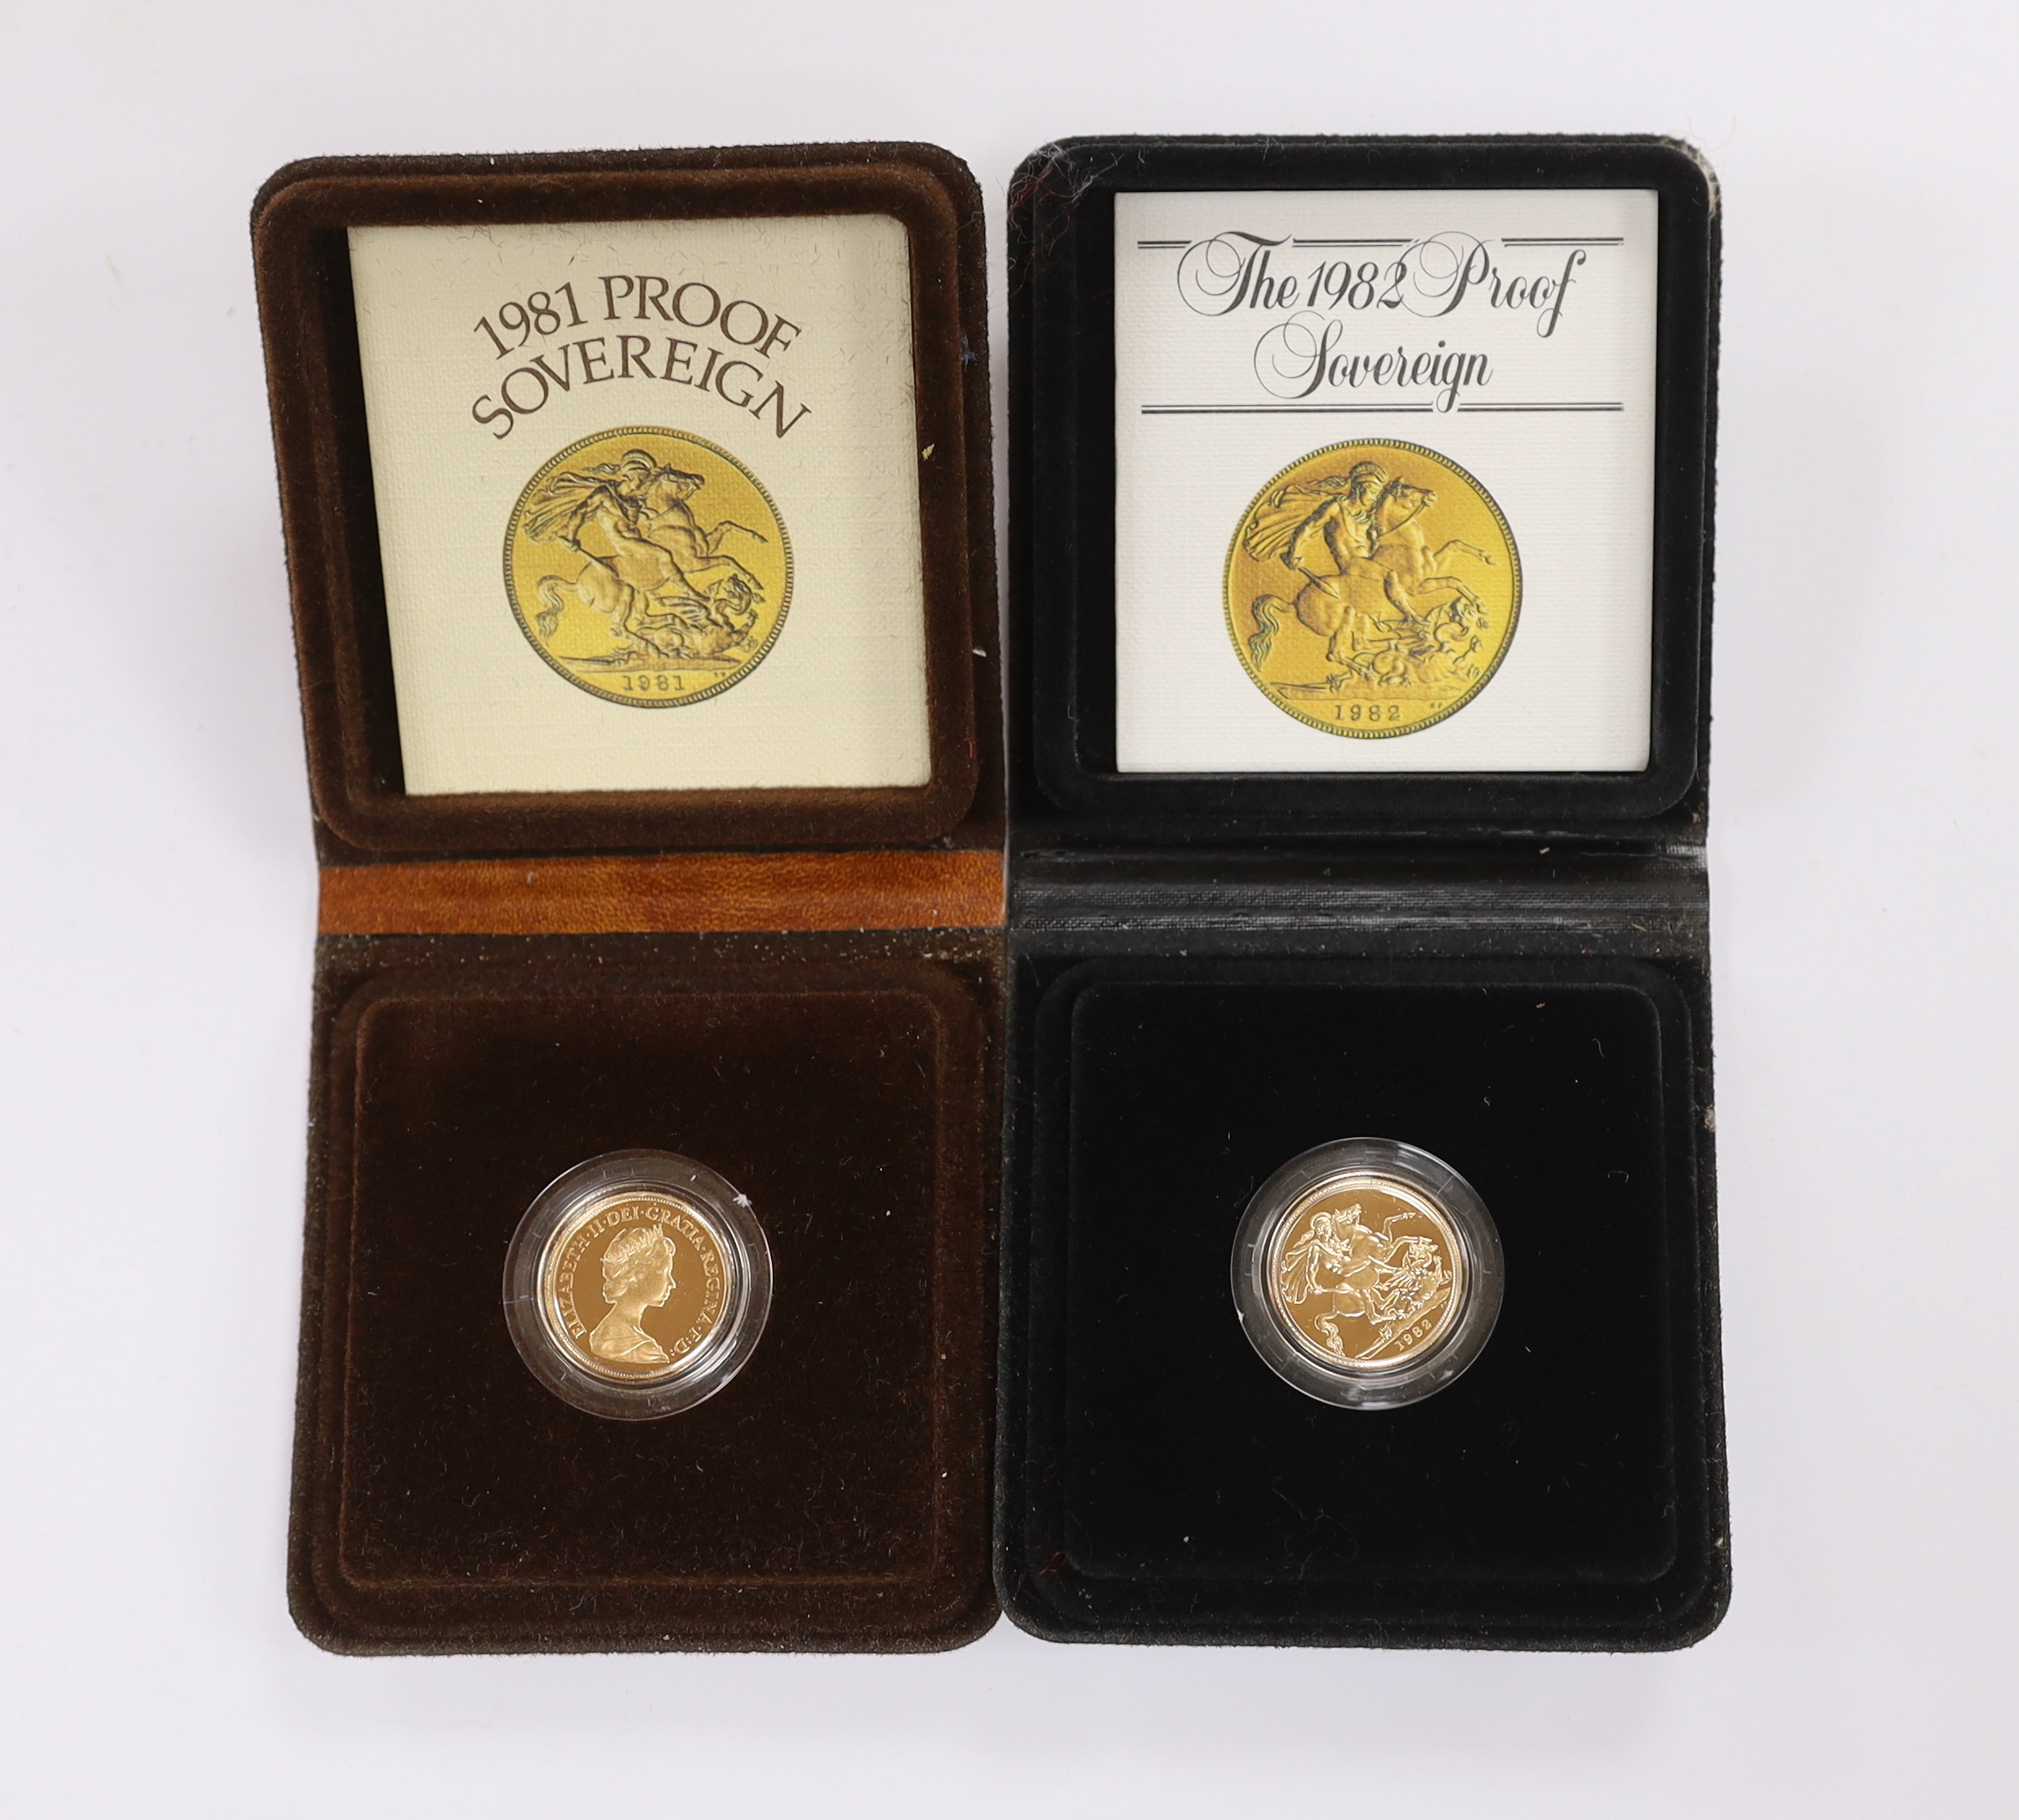 British gold coins - Two Royal Mint QEII Gold Proof Sovereigns, 1981 and 1982, both in case of issue with paperwork